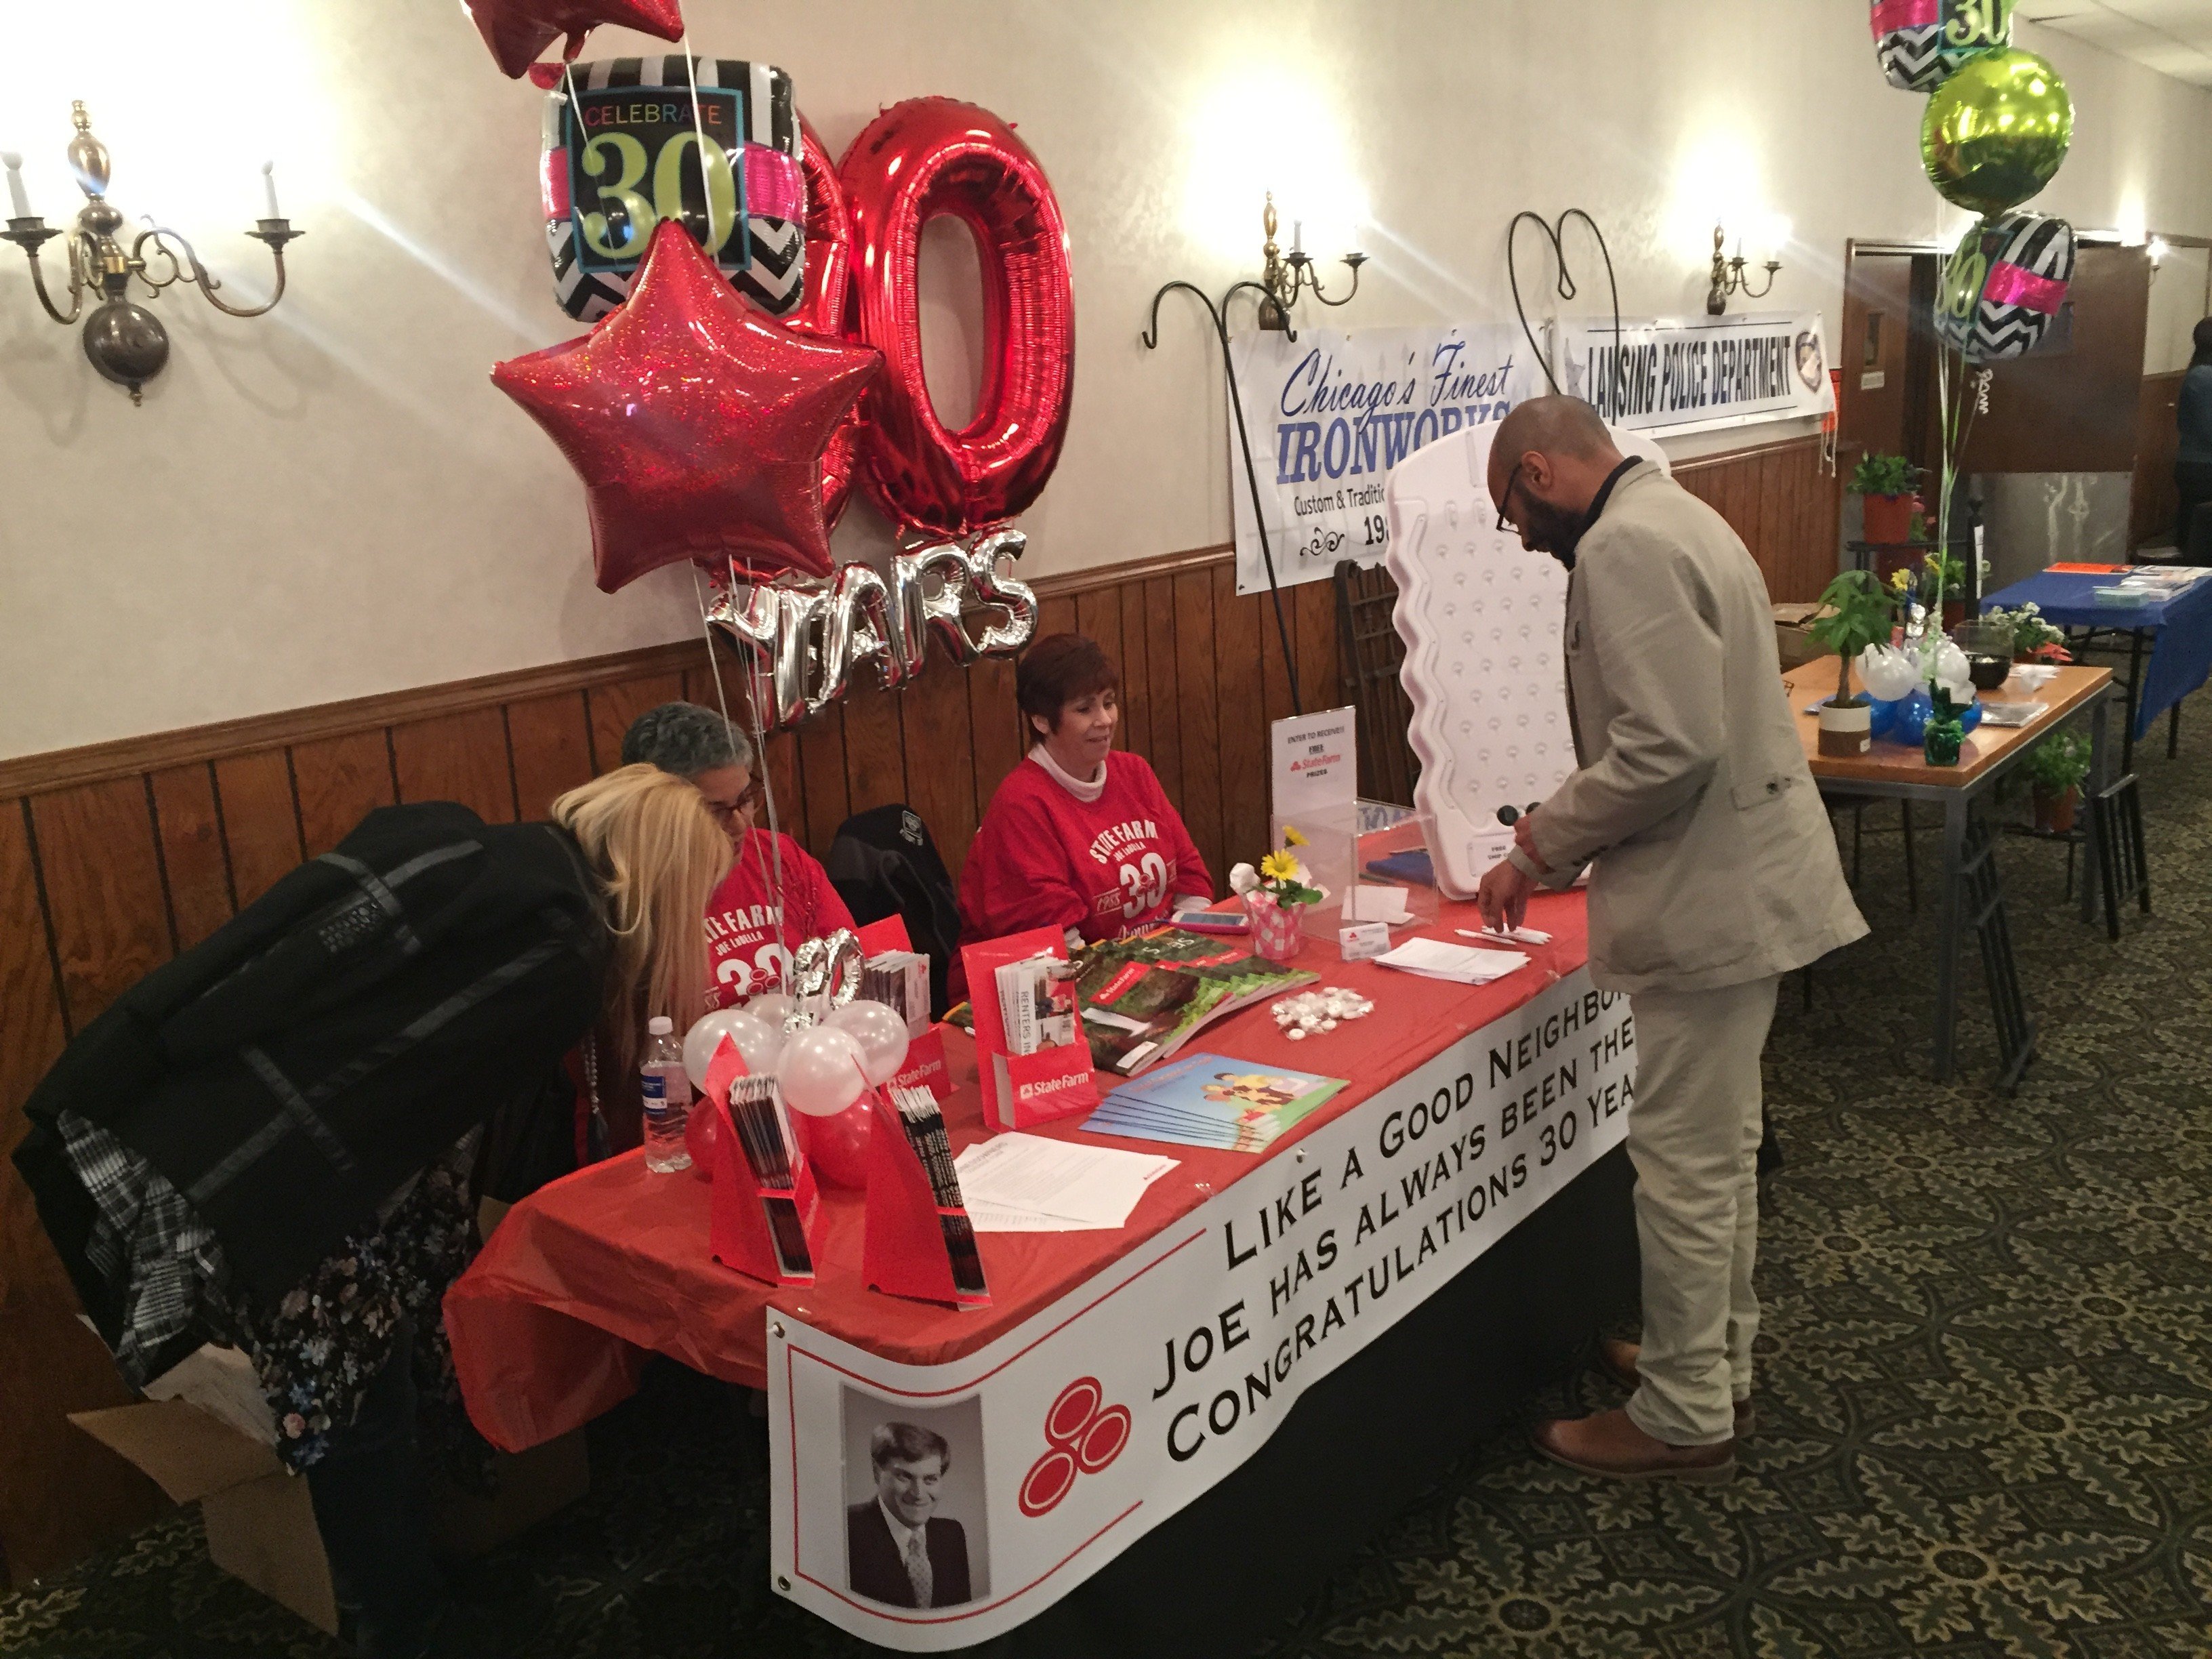 Joe Labella State Farm Insurance booth at the Lansing Chamber of Commerce 2018 Business Expo (Photo: Matthew J. Splant)